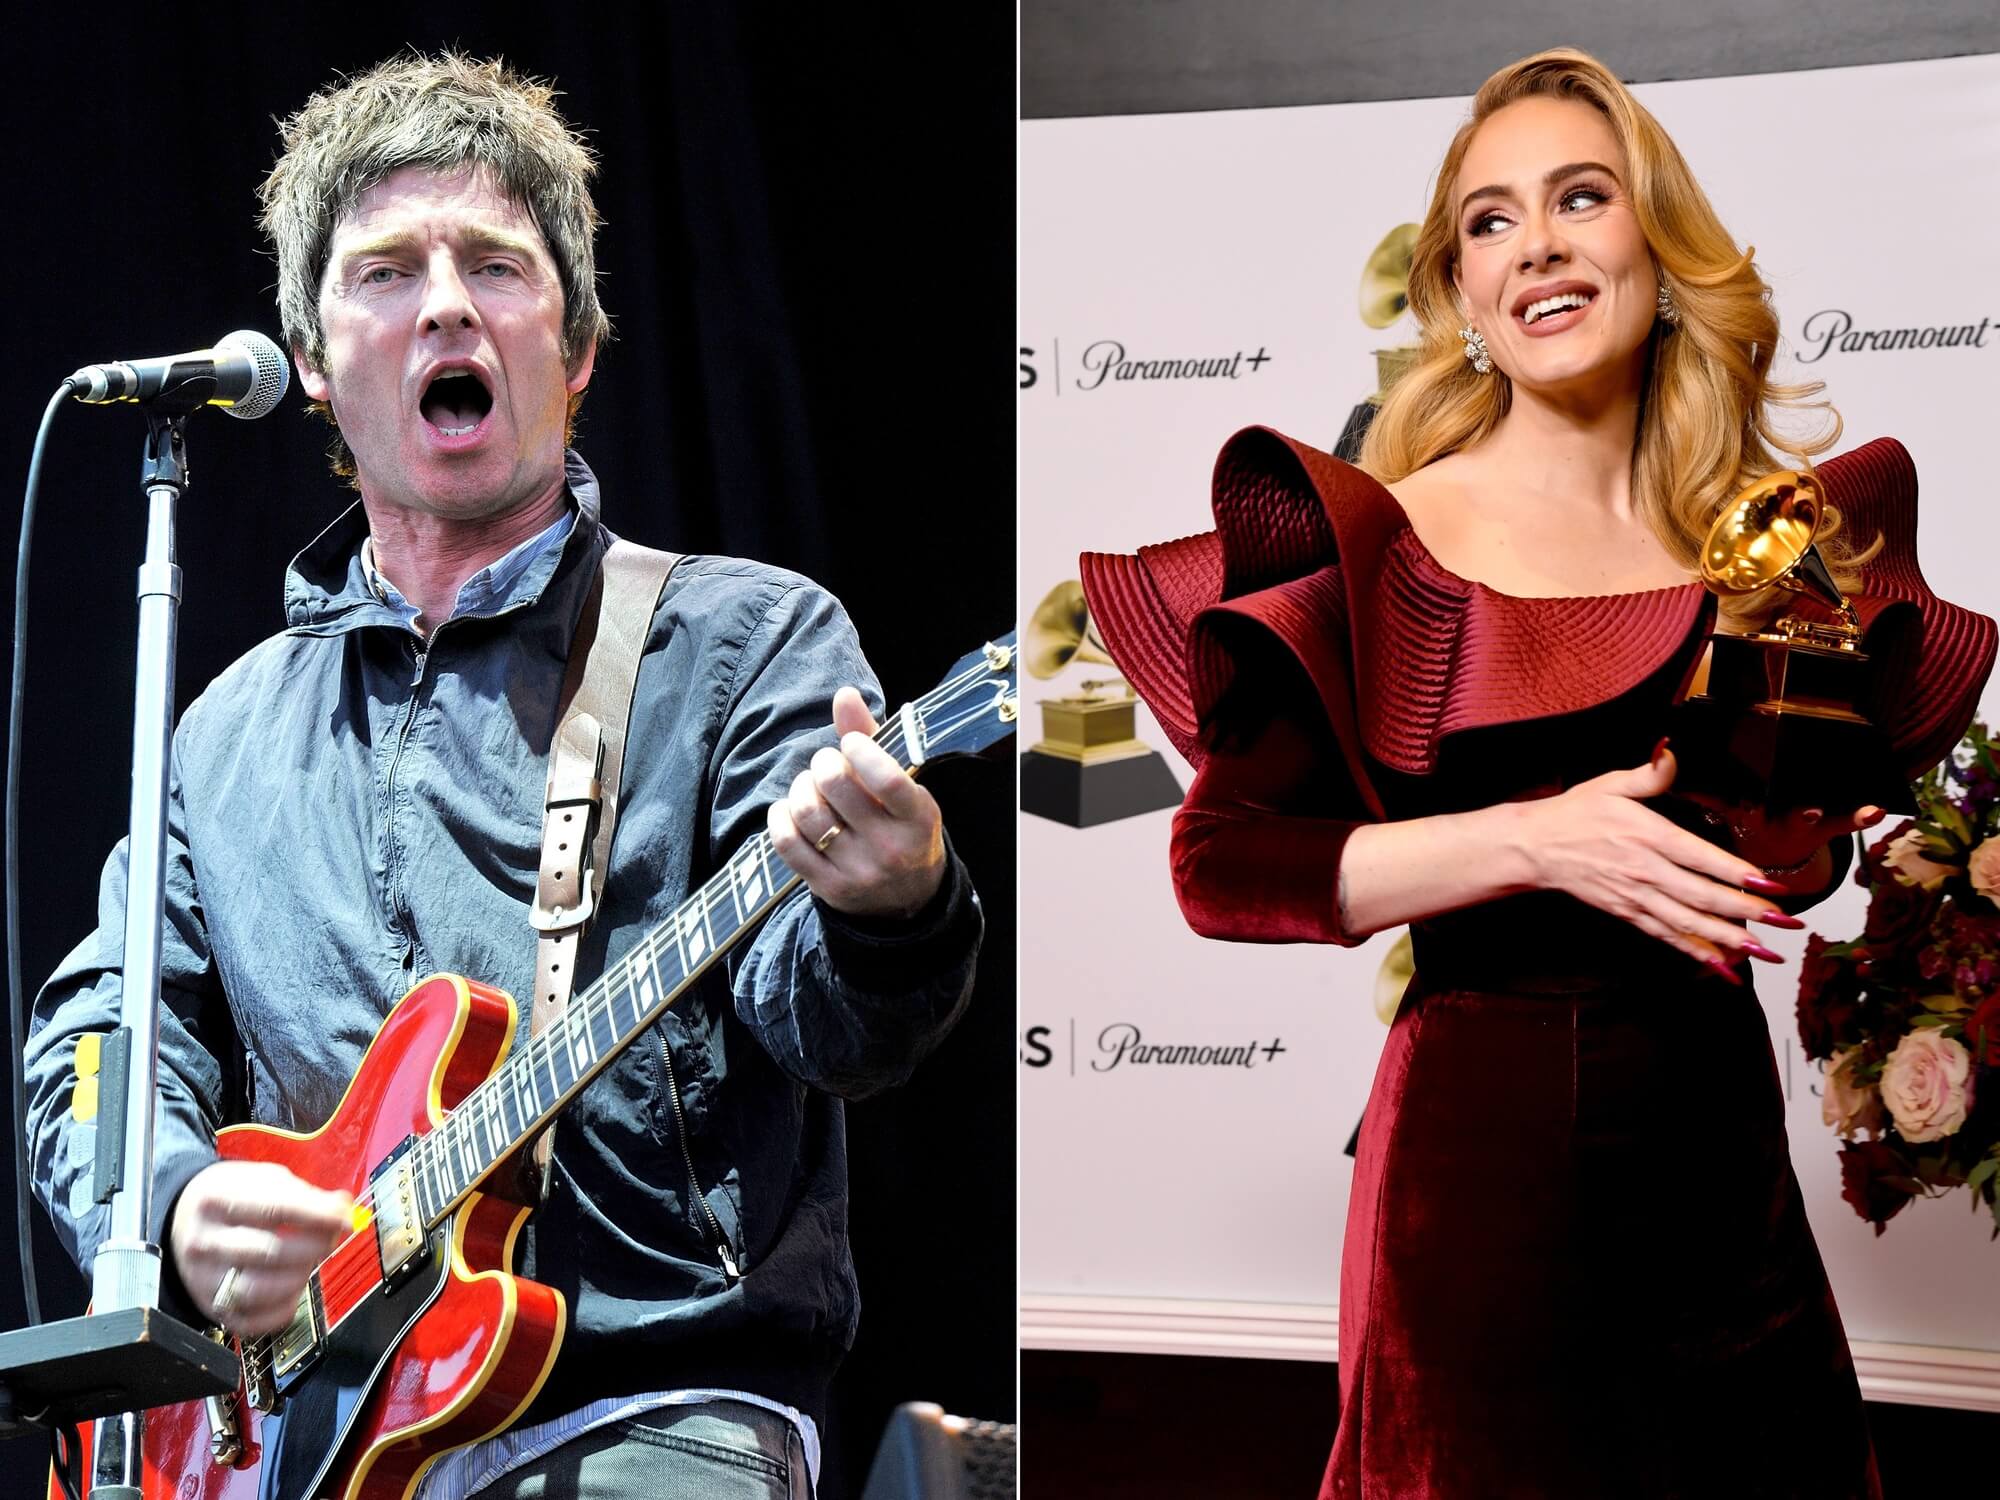 Noel Gallagher and Adele